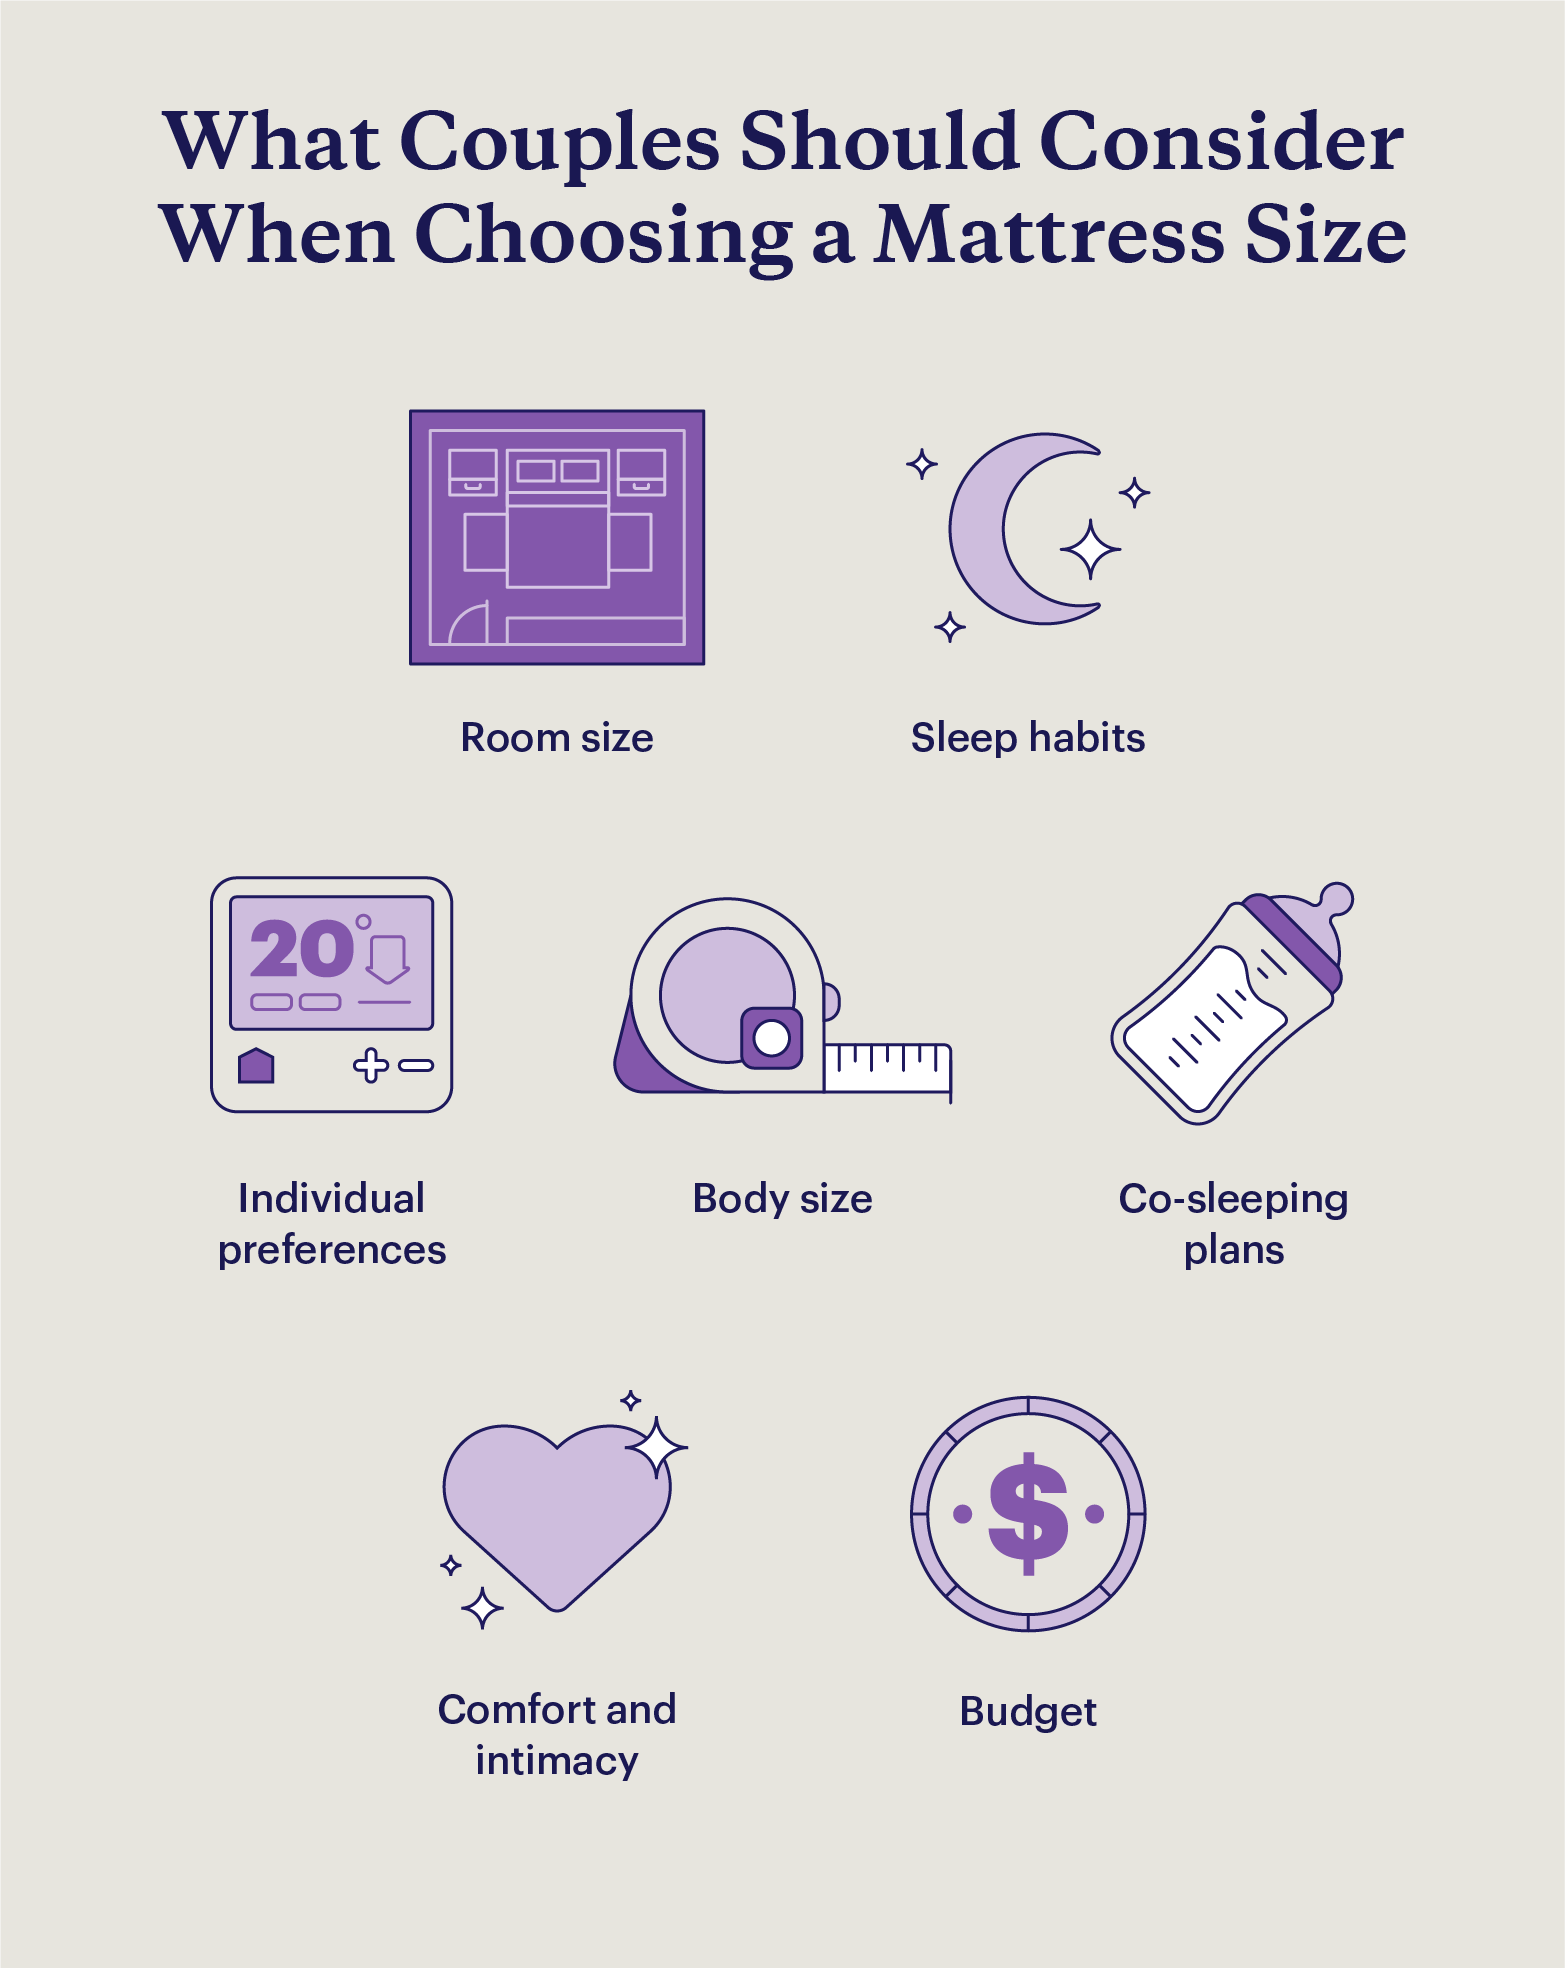 Graphic describing 7 considerations for couples when choosing a bed size.